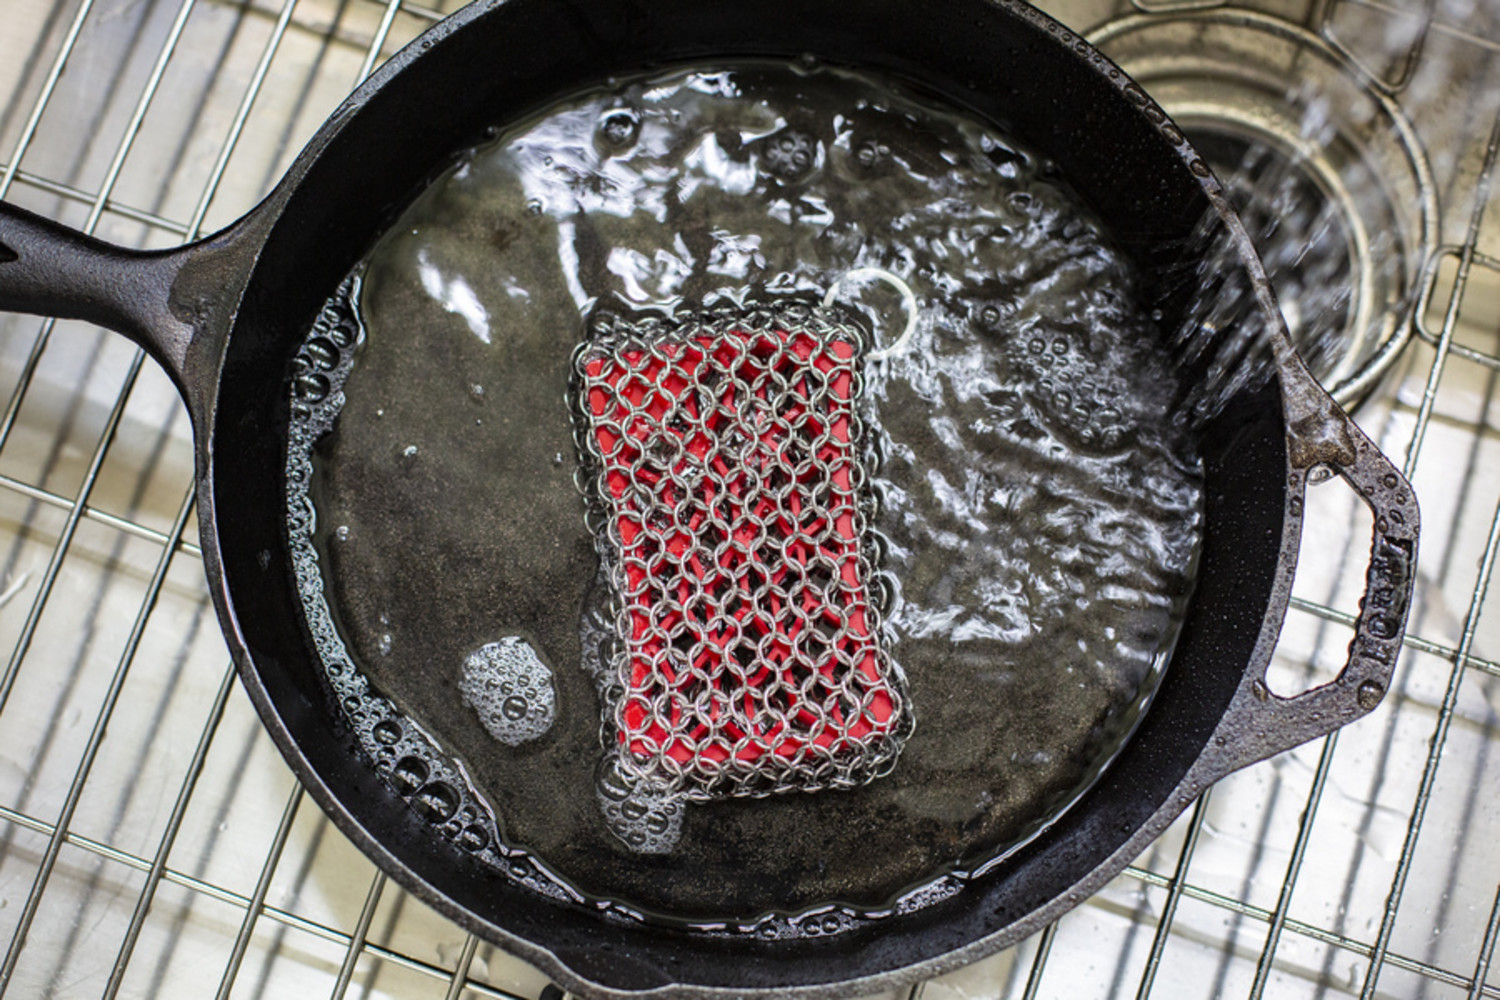 Lodge Chainmail Scrubber - Whisk